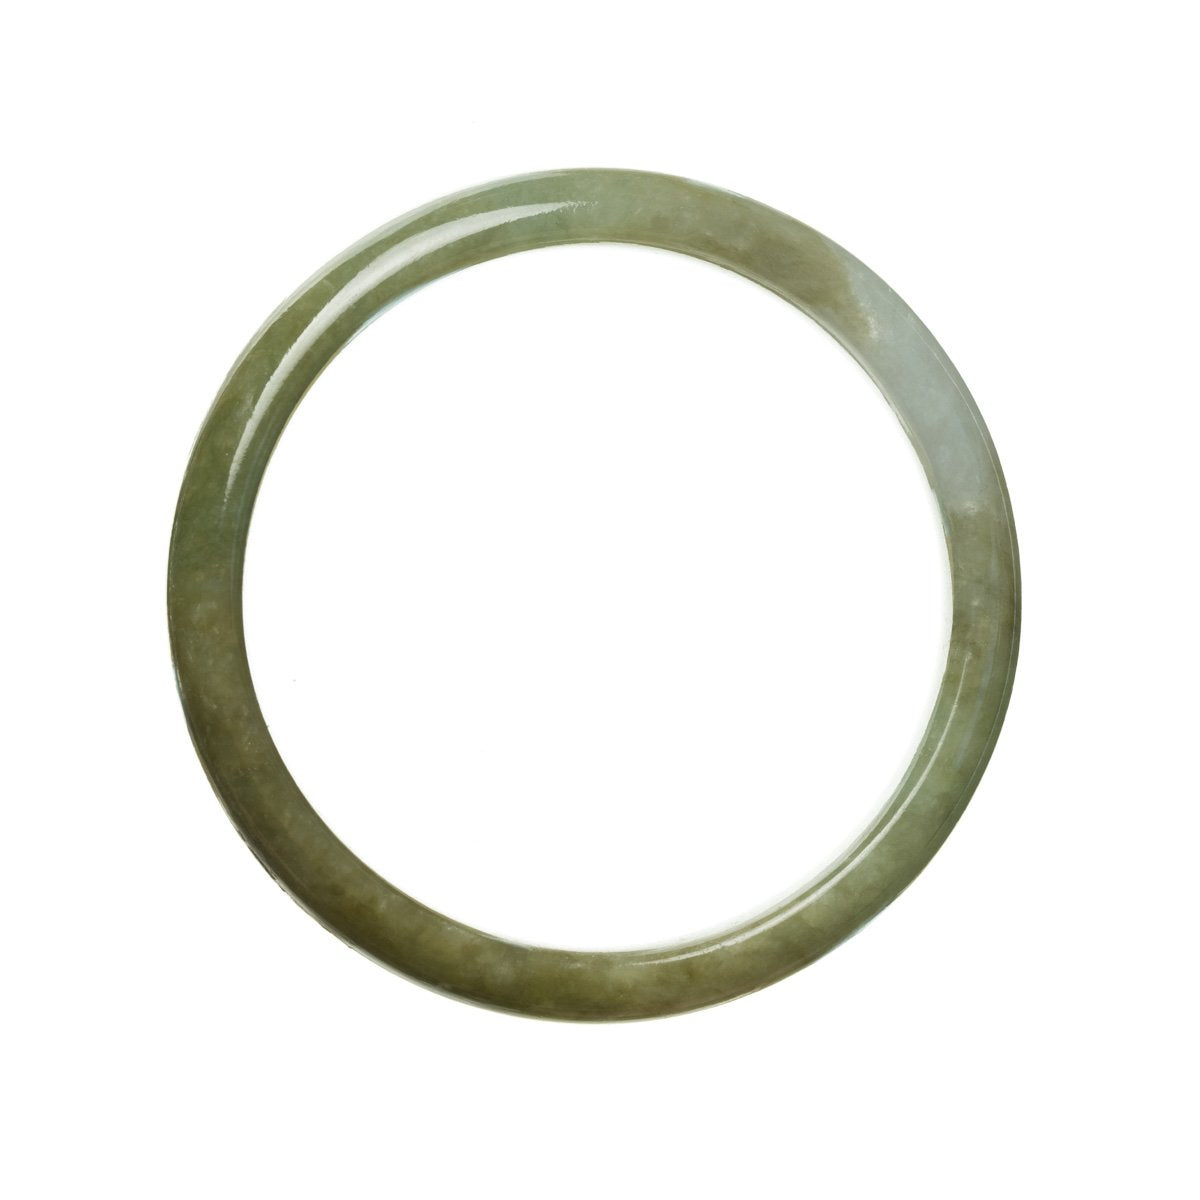 A close-up image of a stunning, high-quality Burmese Jade bangle with a brownish green hue and a 58mm half moon shape. The bangle is carefully crafted and exudes elegance and beauty.